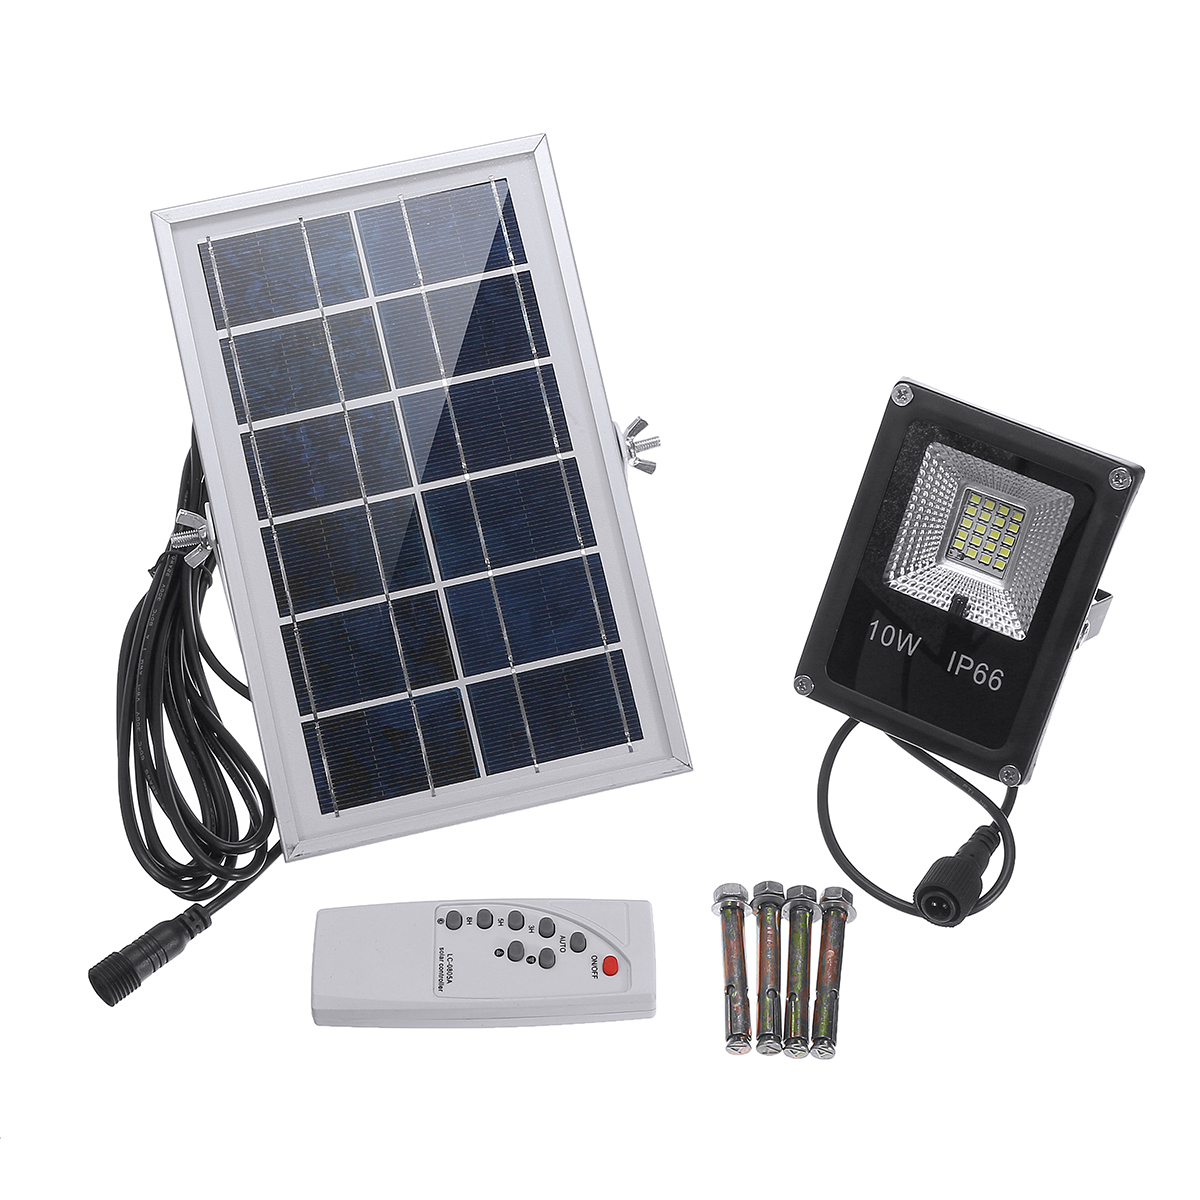 

10W 20LED IP66 Waterproof Solar Panel Flood Light Outdoor Garden Street Path Yard Lamp With Remote Control